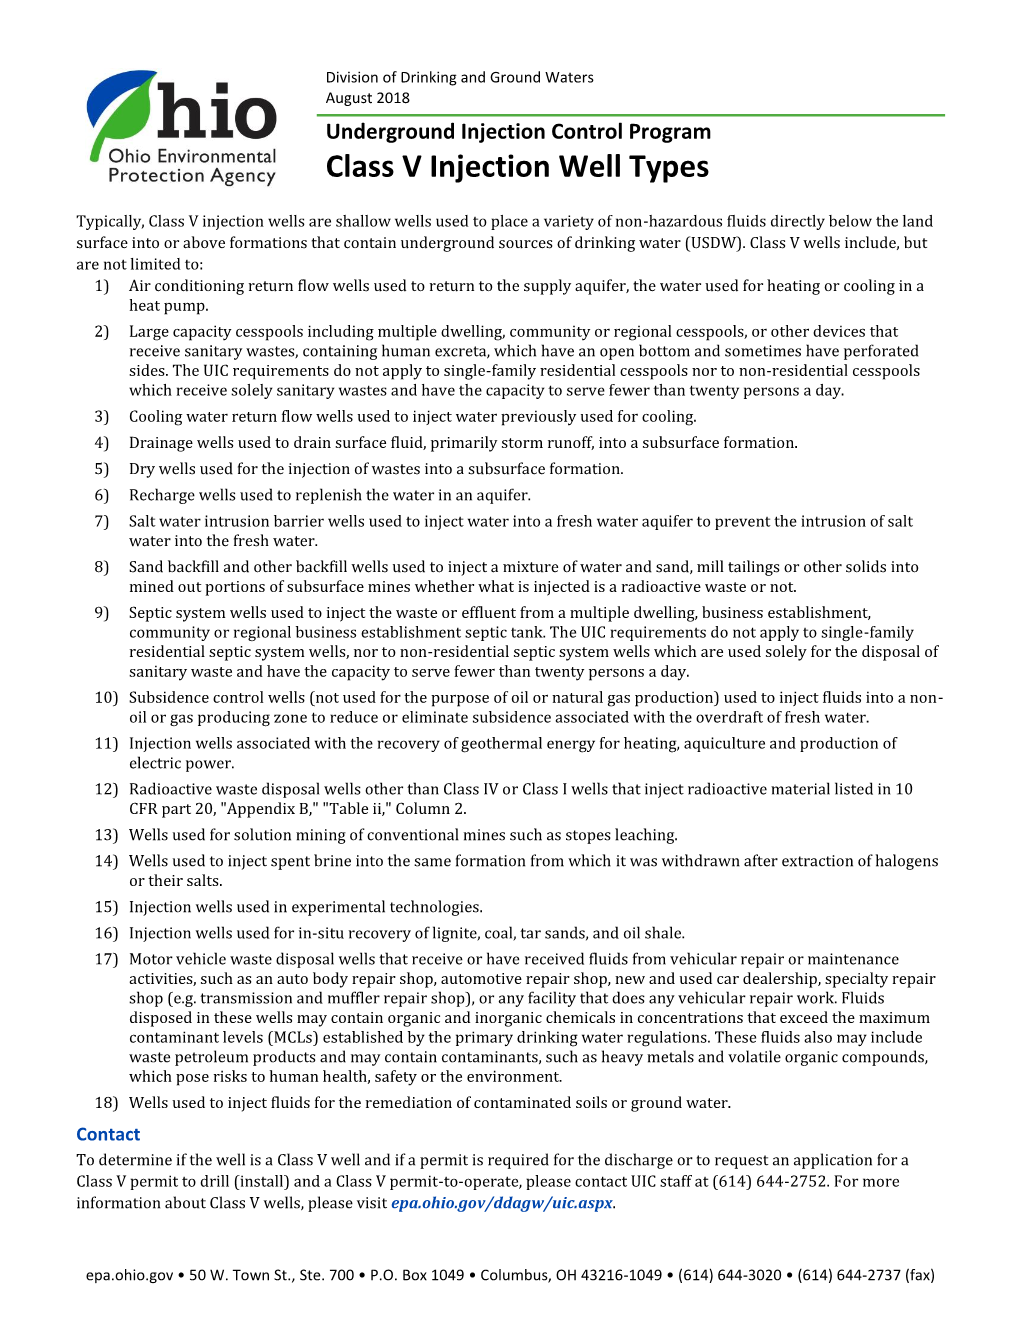 Class V Injection Well Types